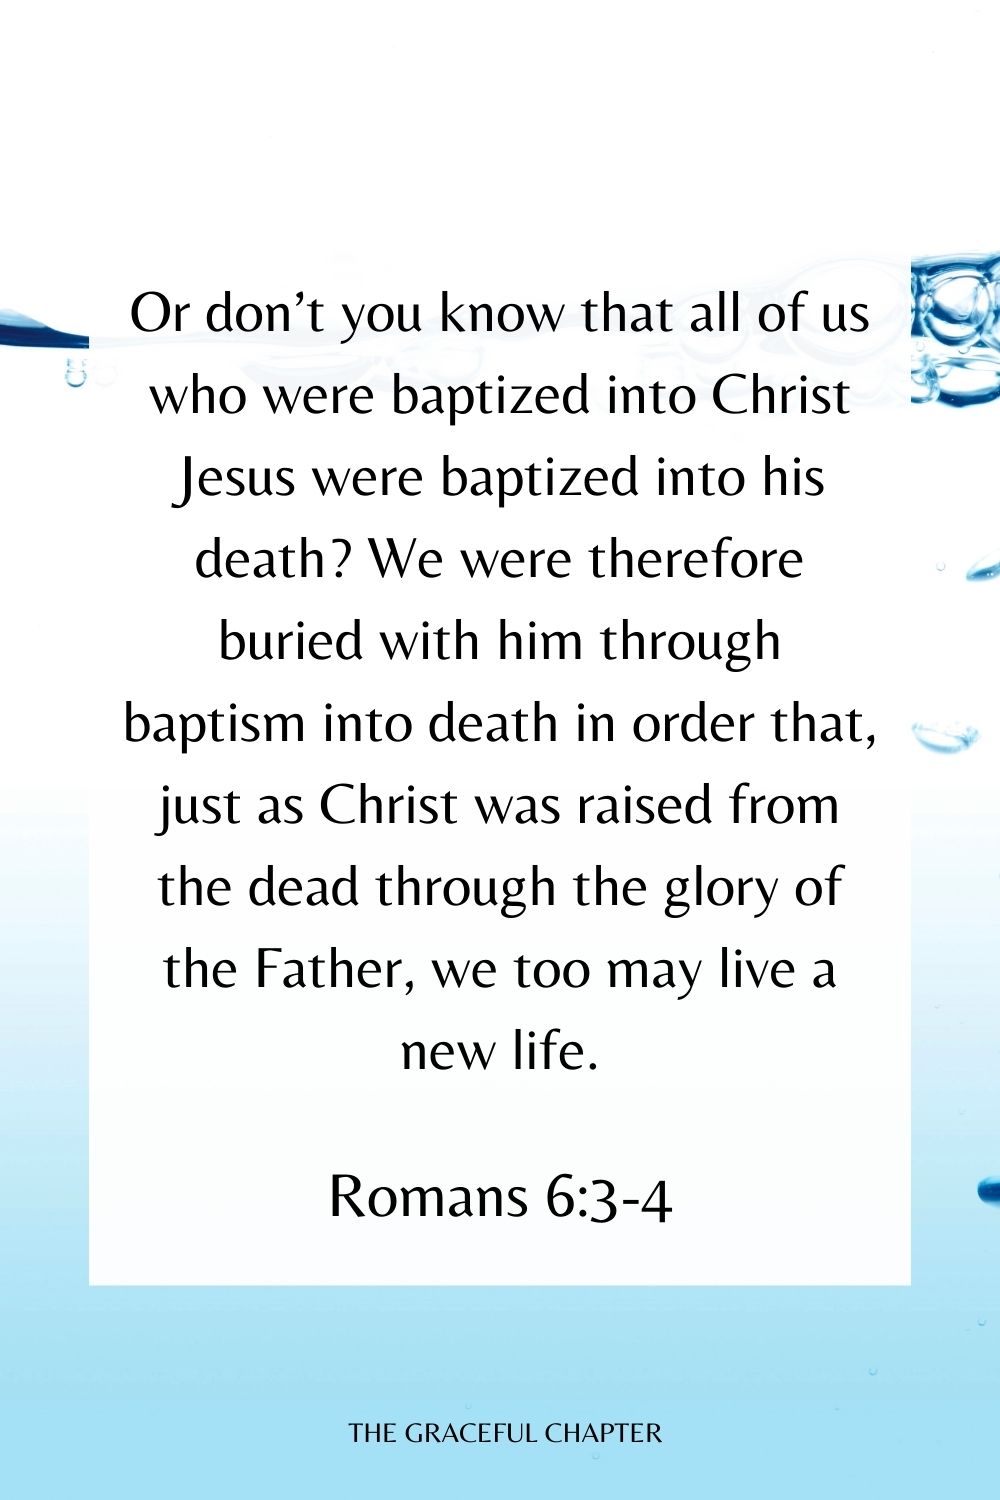 Or don’t you know that all of us who were baptized into Christ Jesus were baptized into his death? We were therefore buried with him through baptism into death in order that, just as Christ was raised from the dead through the glory of the Father, we too may live a new life. Romans 6:3-4